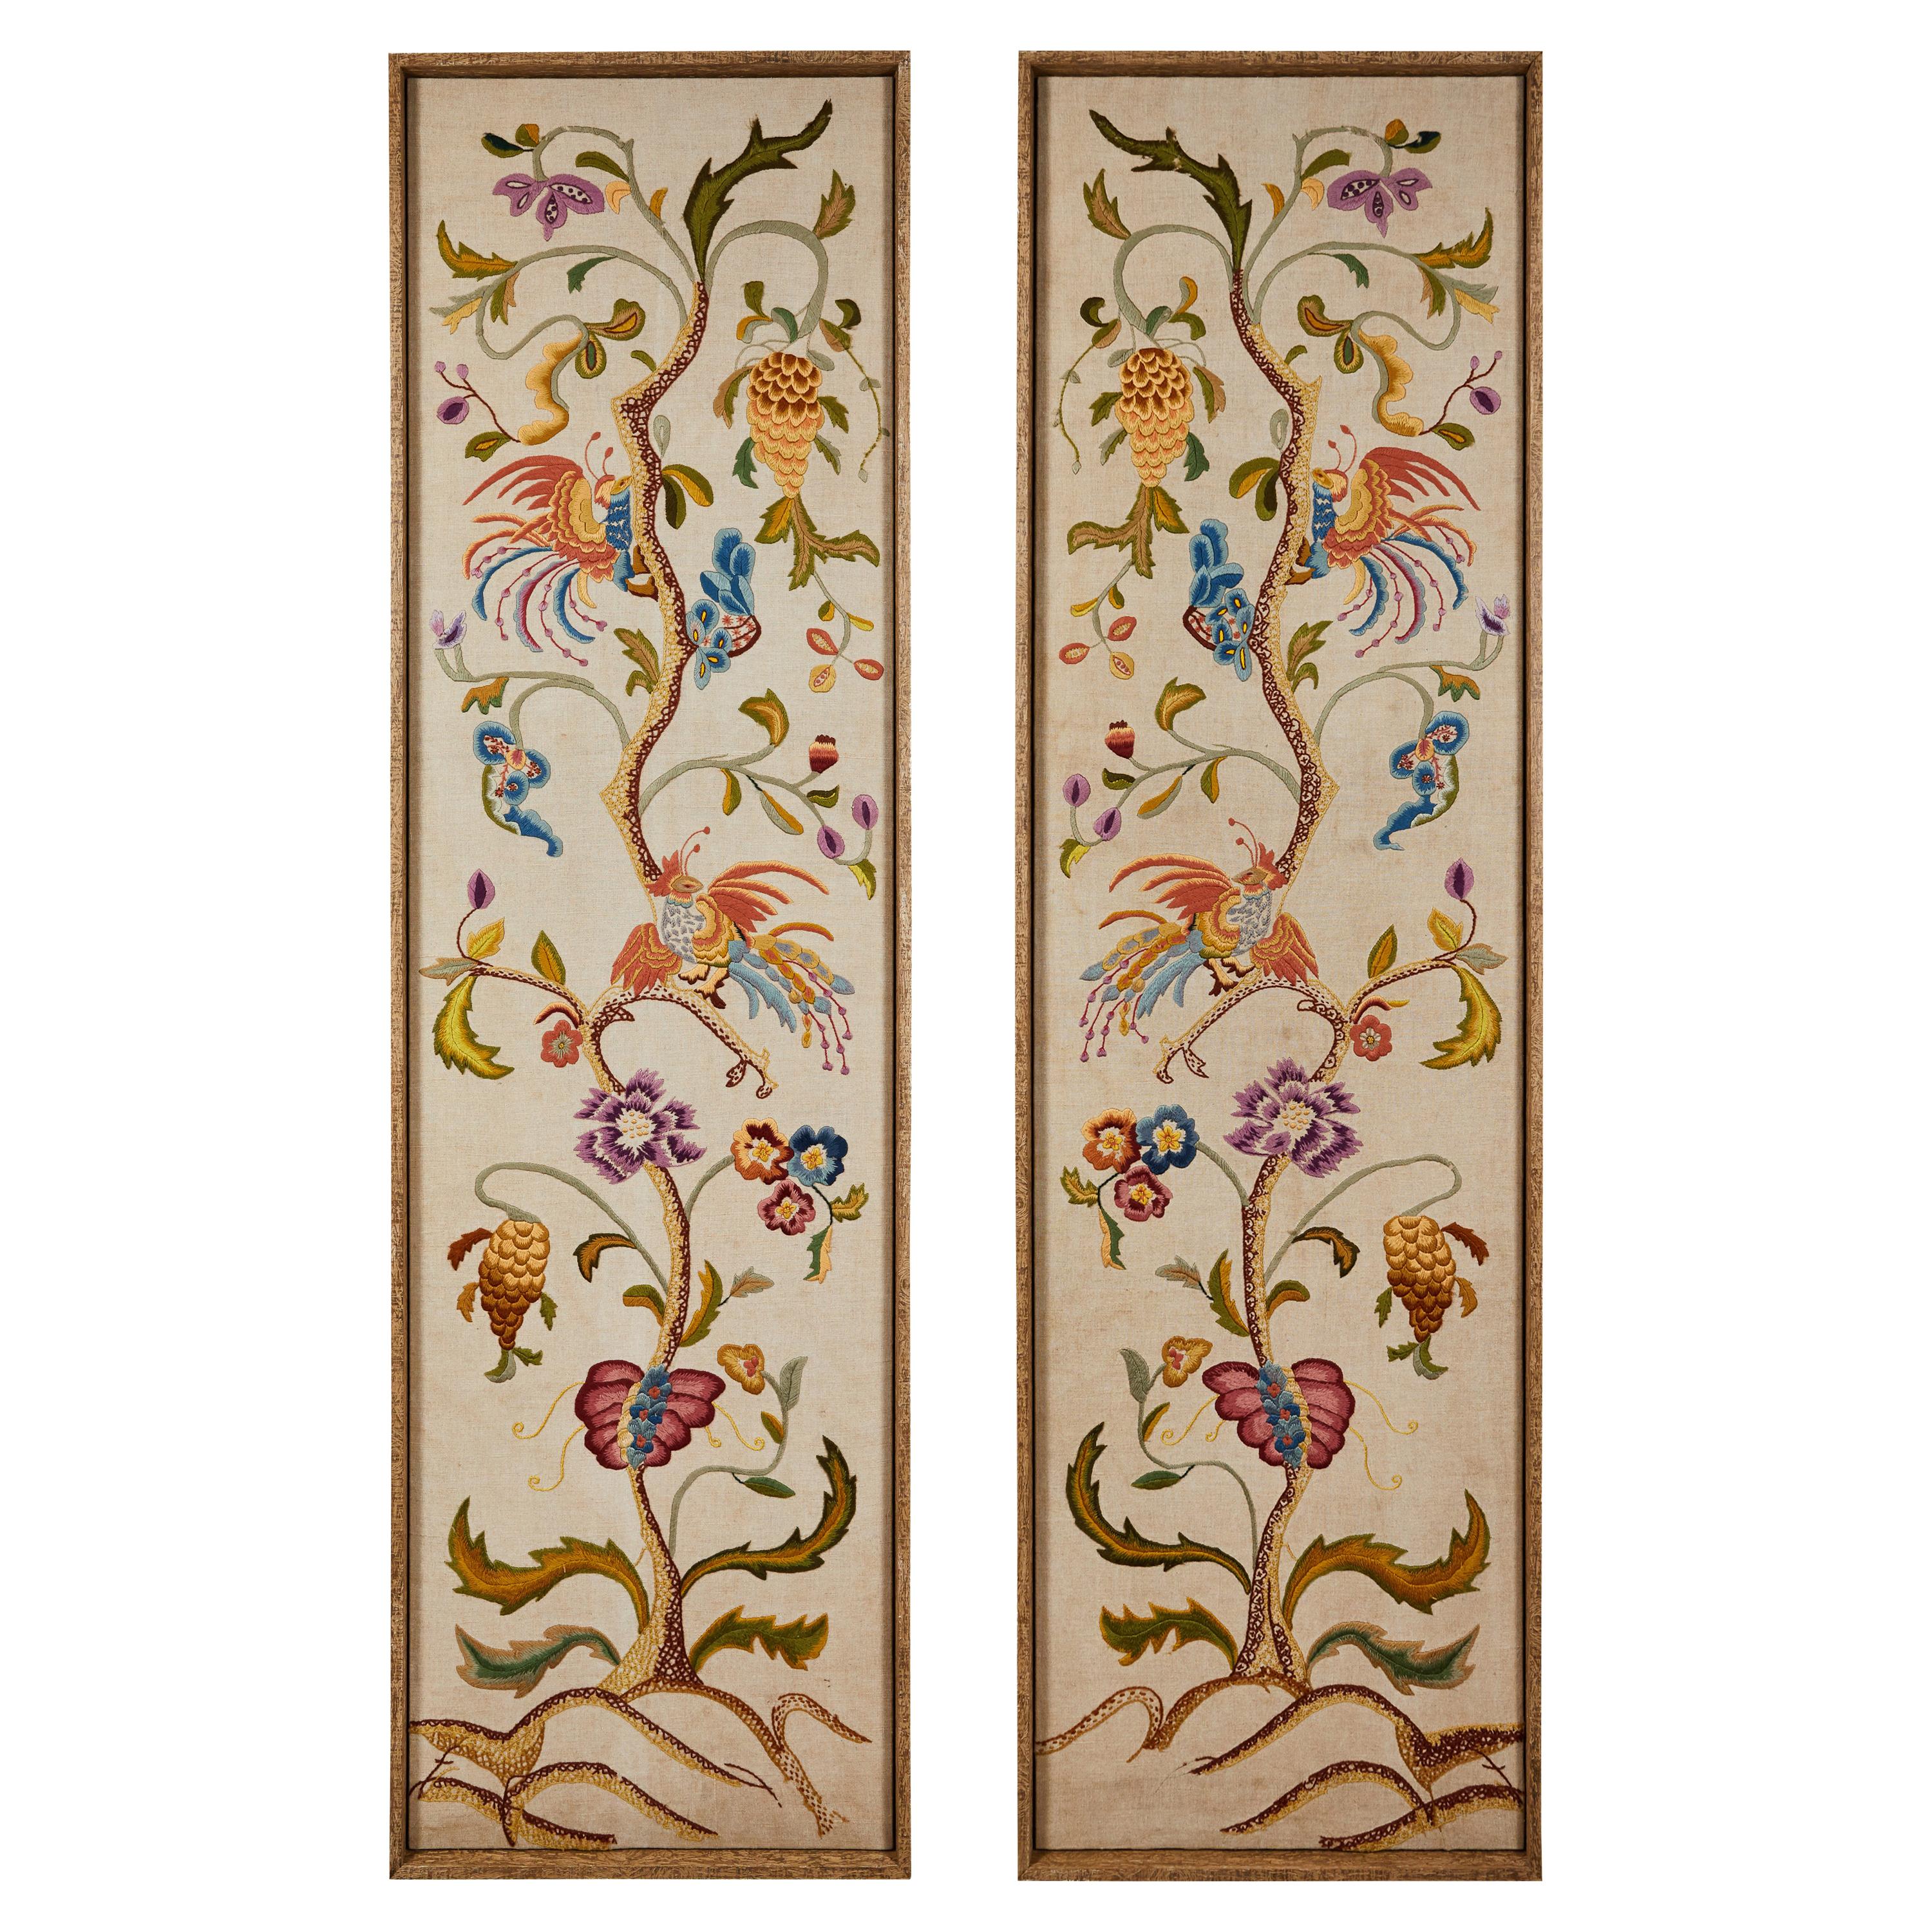 Pair of Embroidered Antique Linen Curtain Panels in Museum Quality Frames